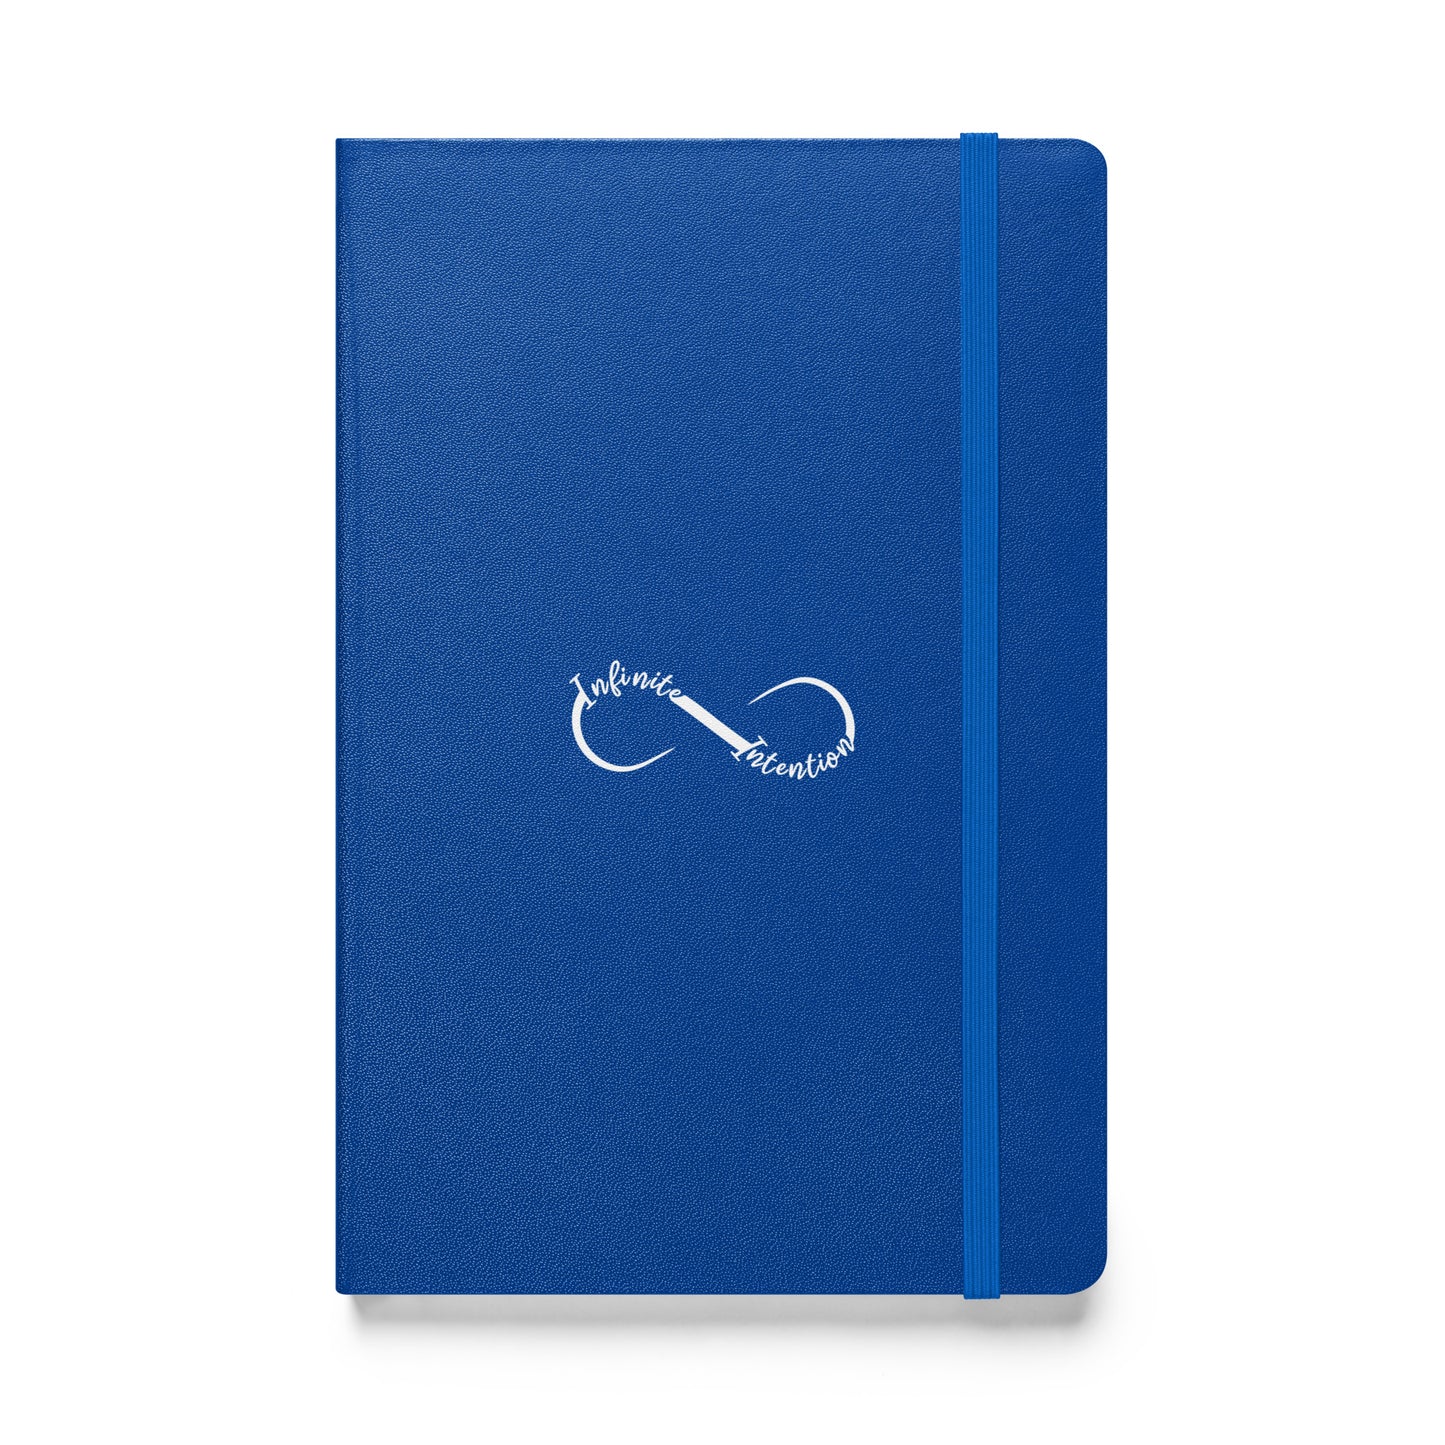 Blue front cover notebook